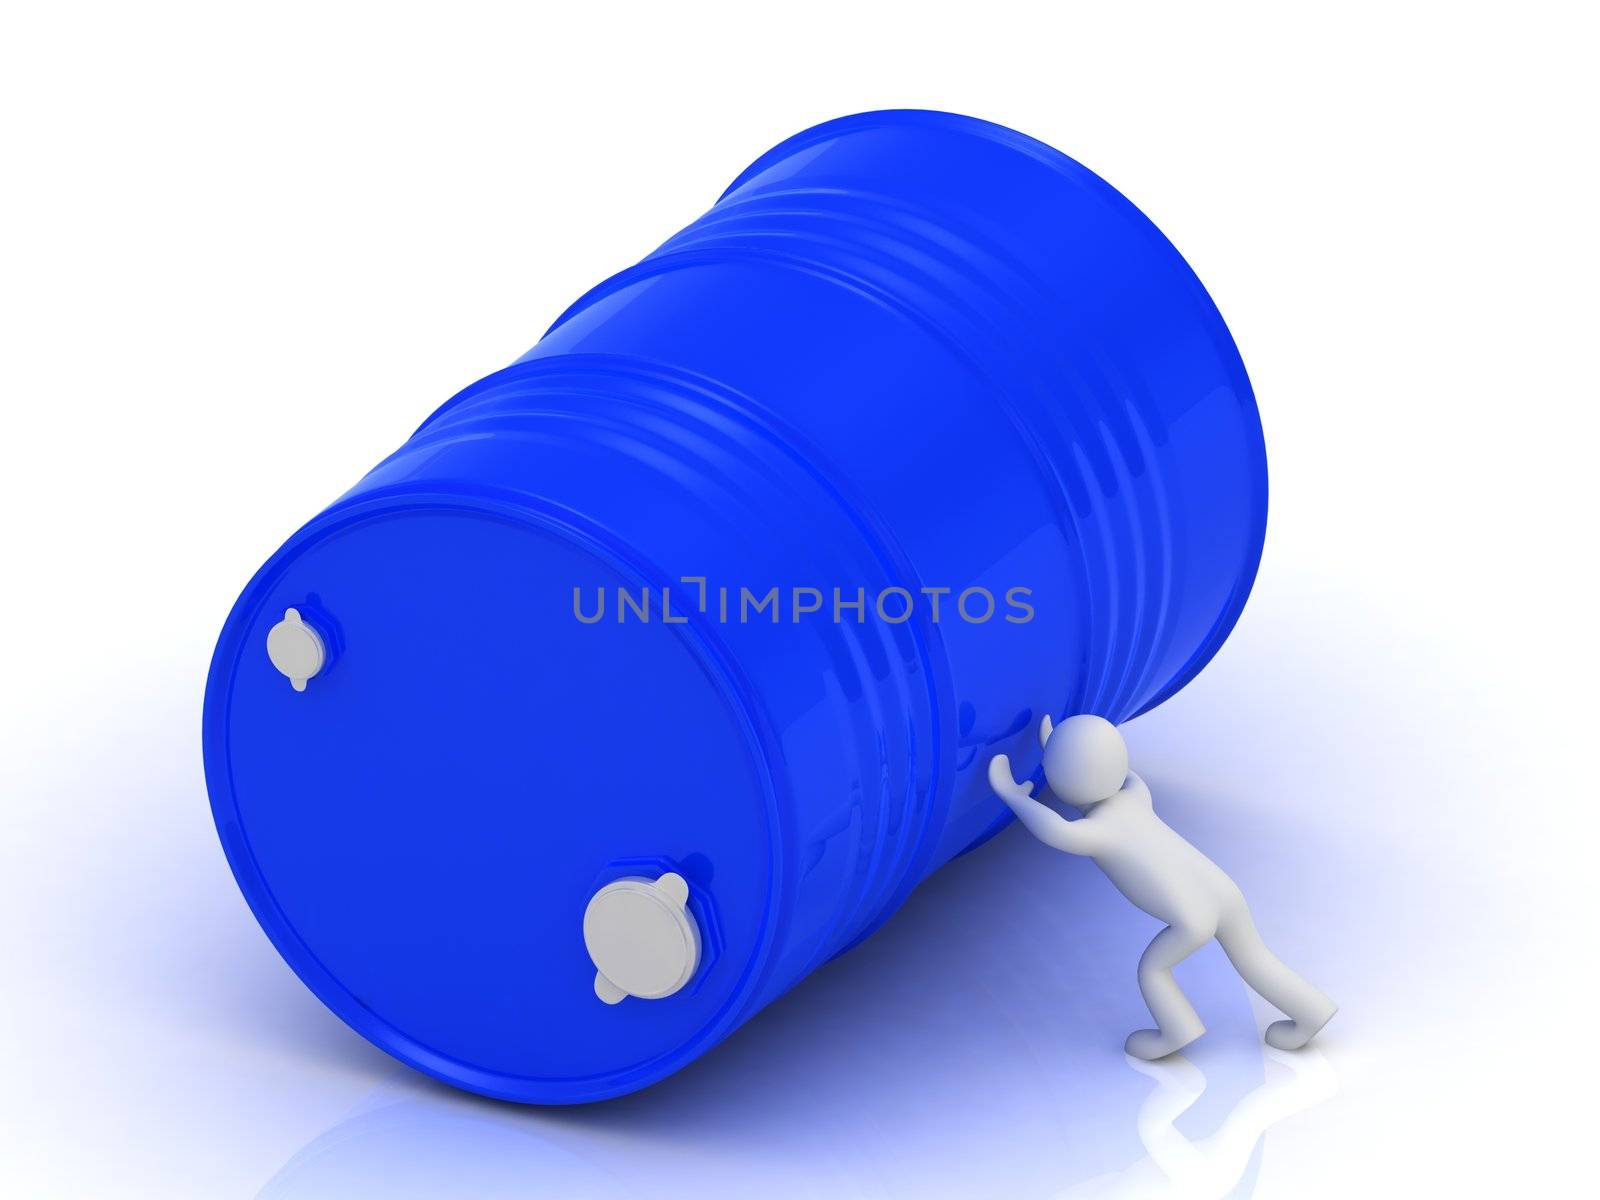 3D man pushing a large metal oil barrel. Illustration isolated on white background